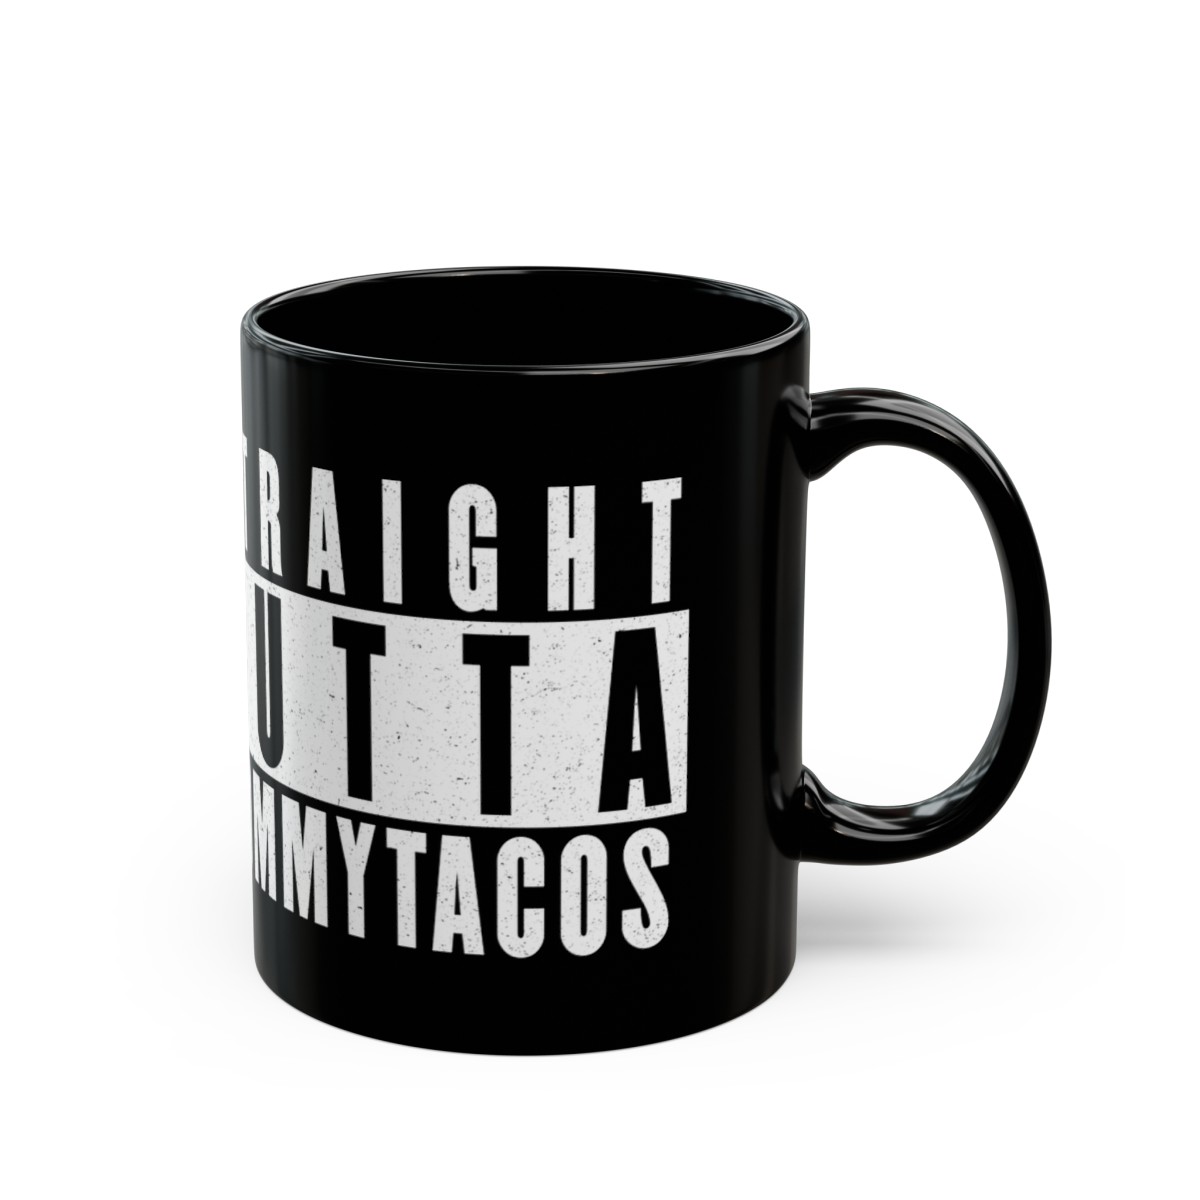 Straight Outta Tommy Tacos Mug product thumbnail image